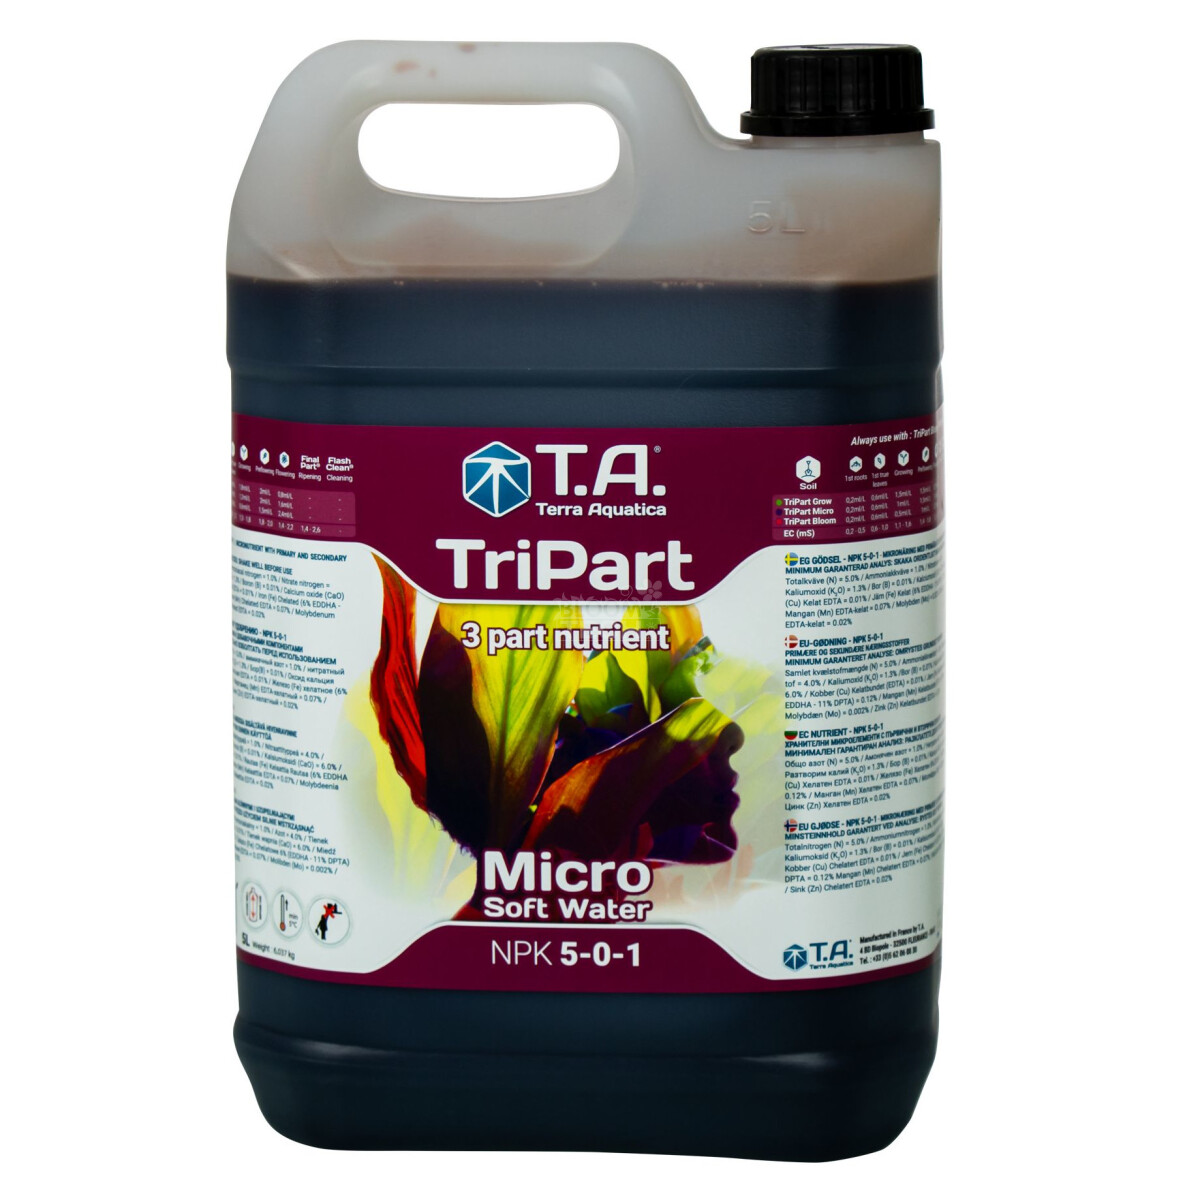 T.A. TriPart 44,90 Bloomtech, Softwater 5 - € Micro Liter